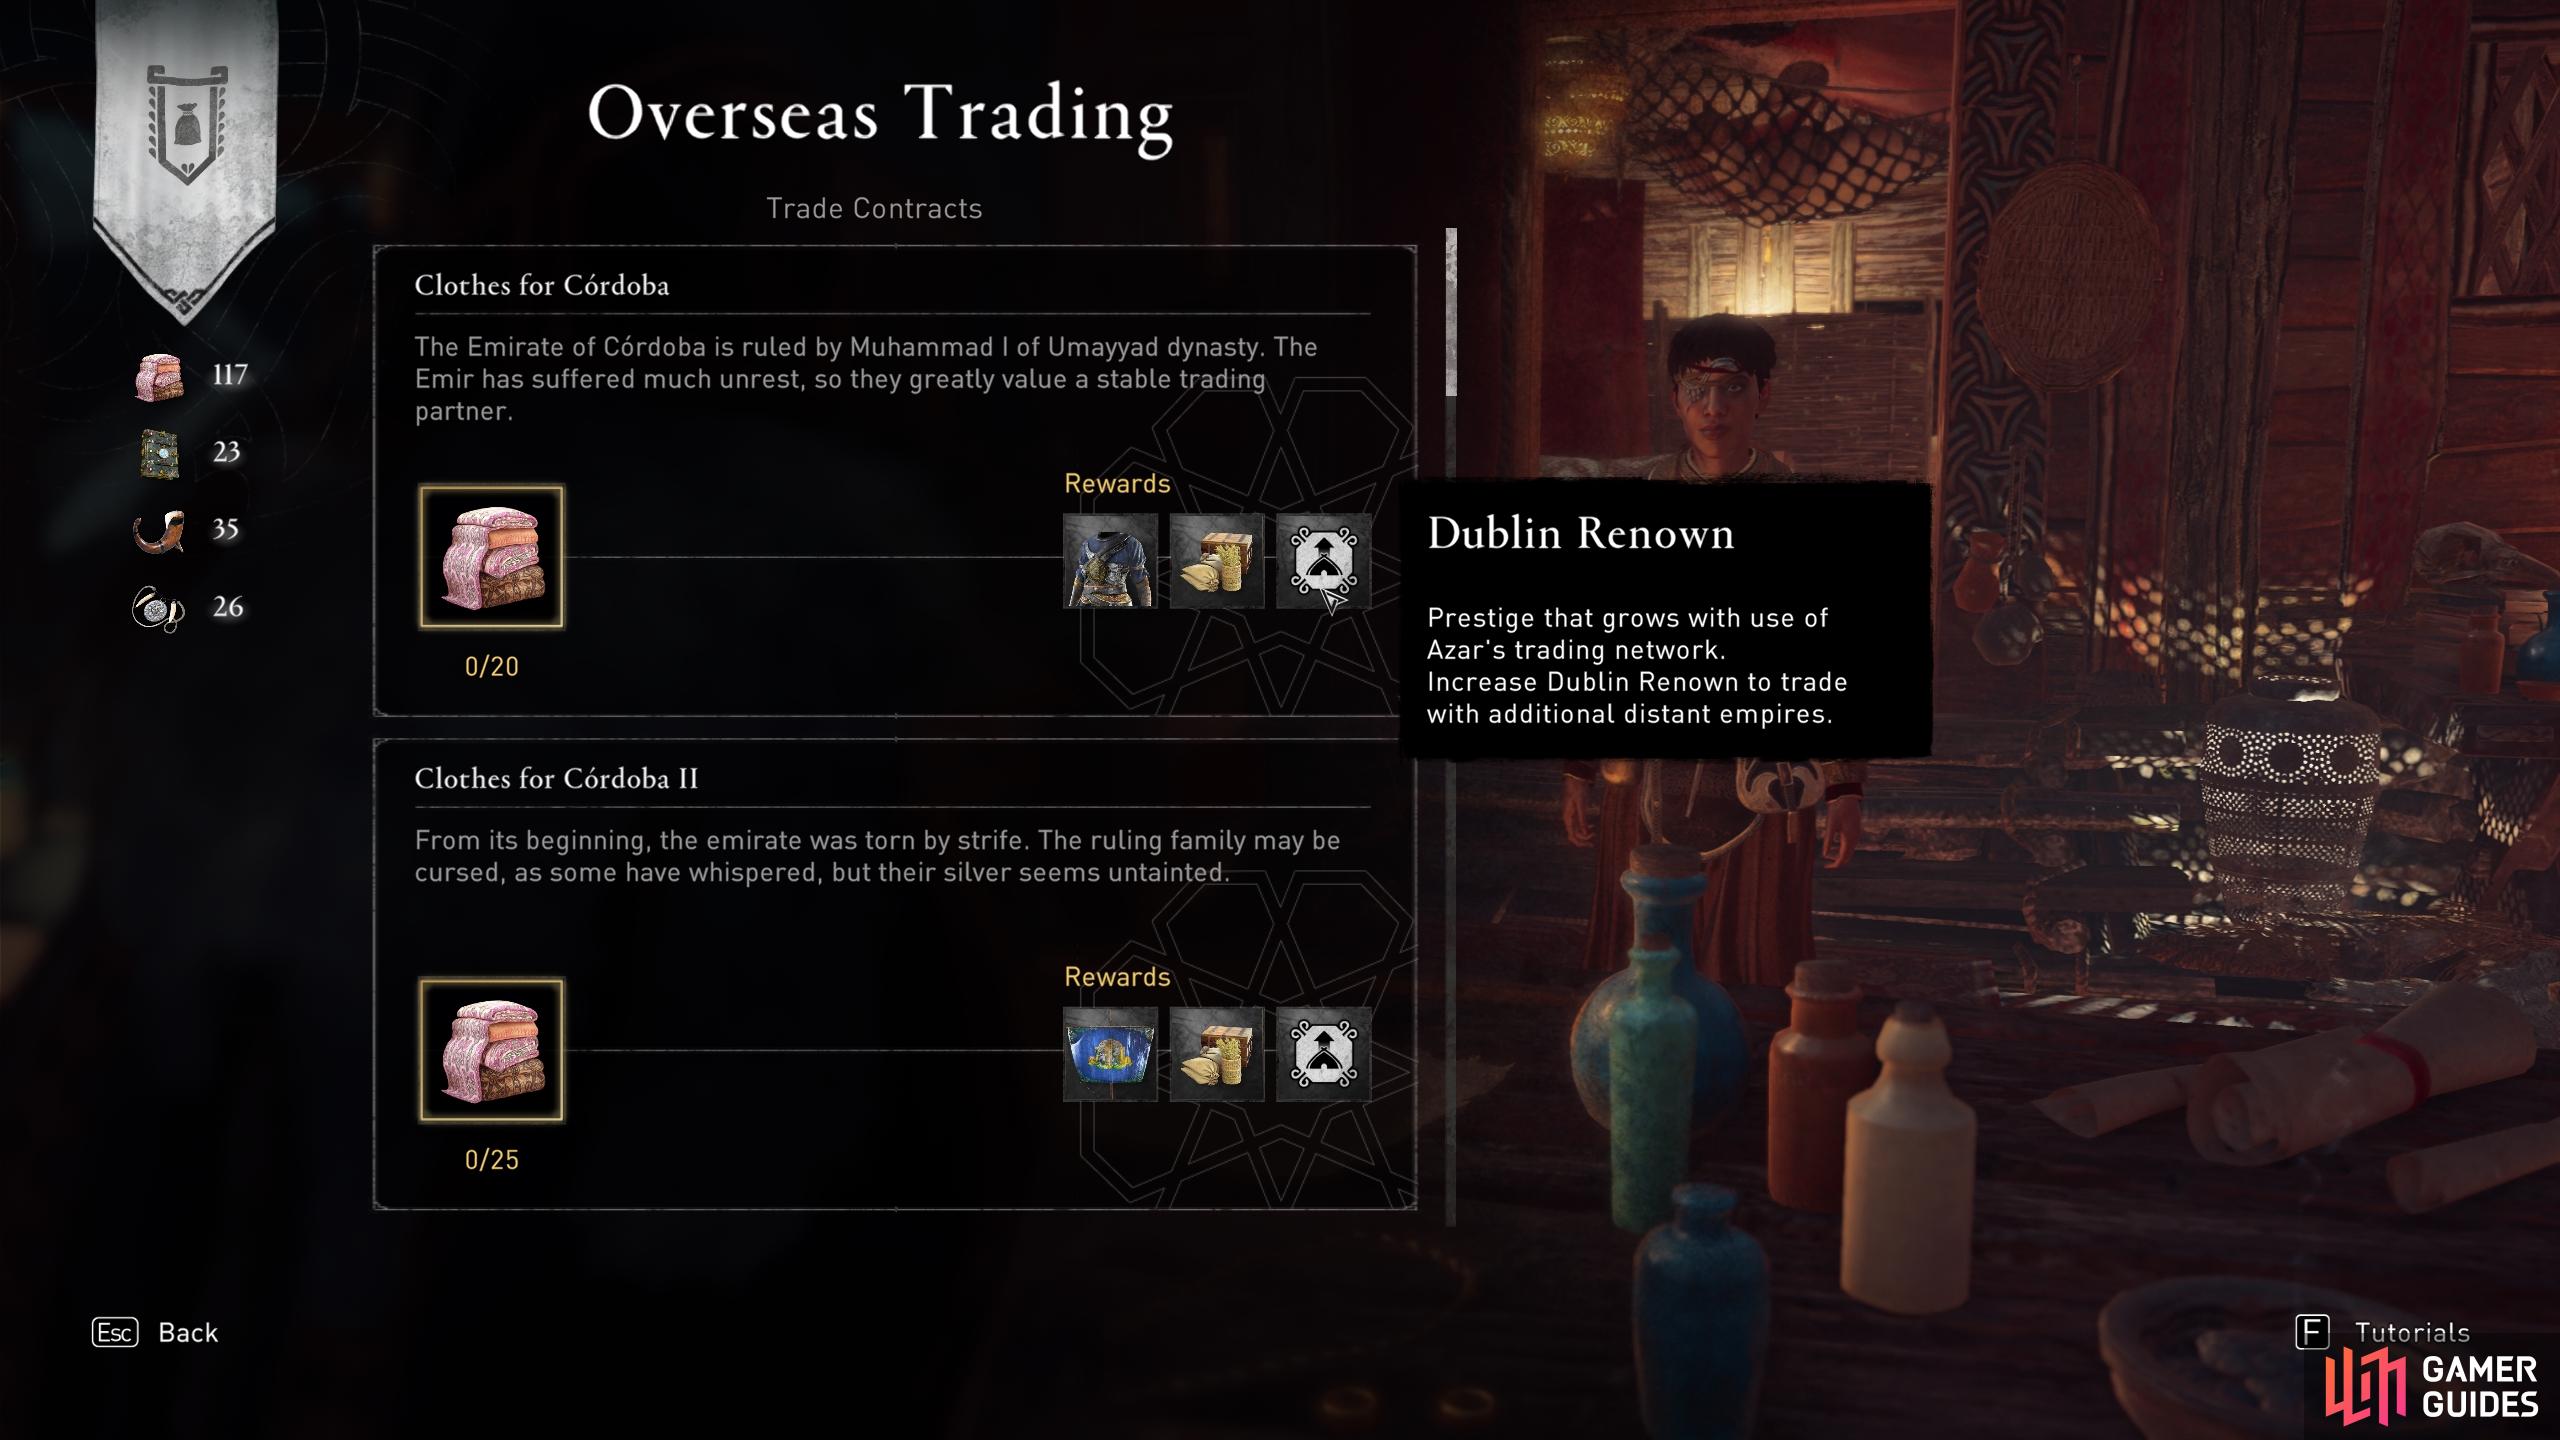 You can speak with Azar to trade Clothing, Texts, Delicacies, and Luxuries for various rewards, while also increasing Dublin renown.